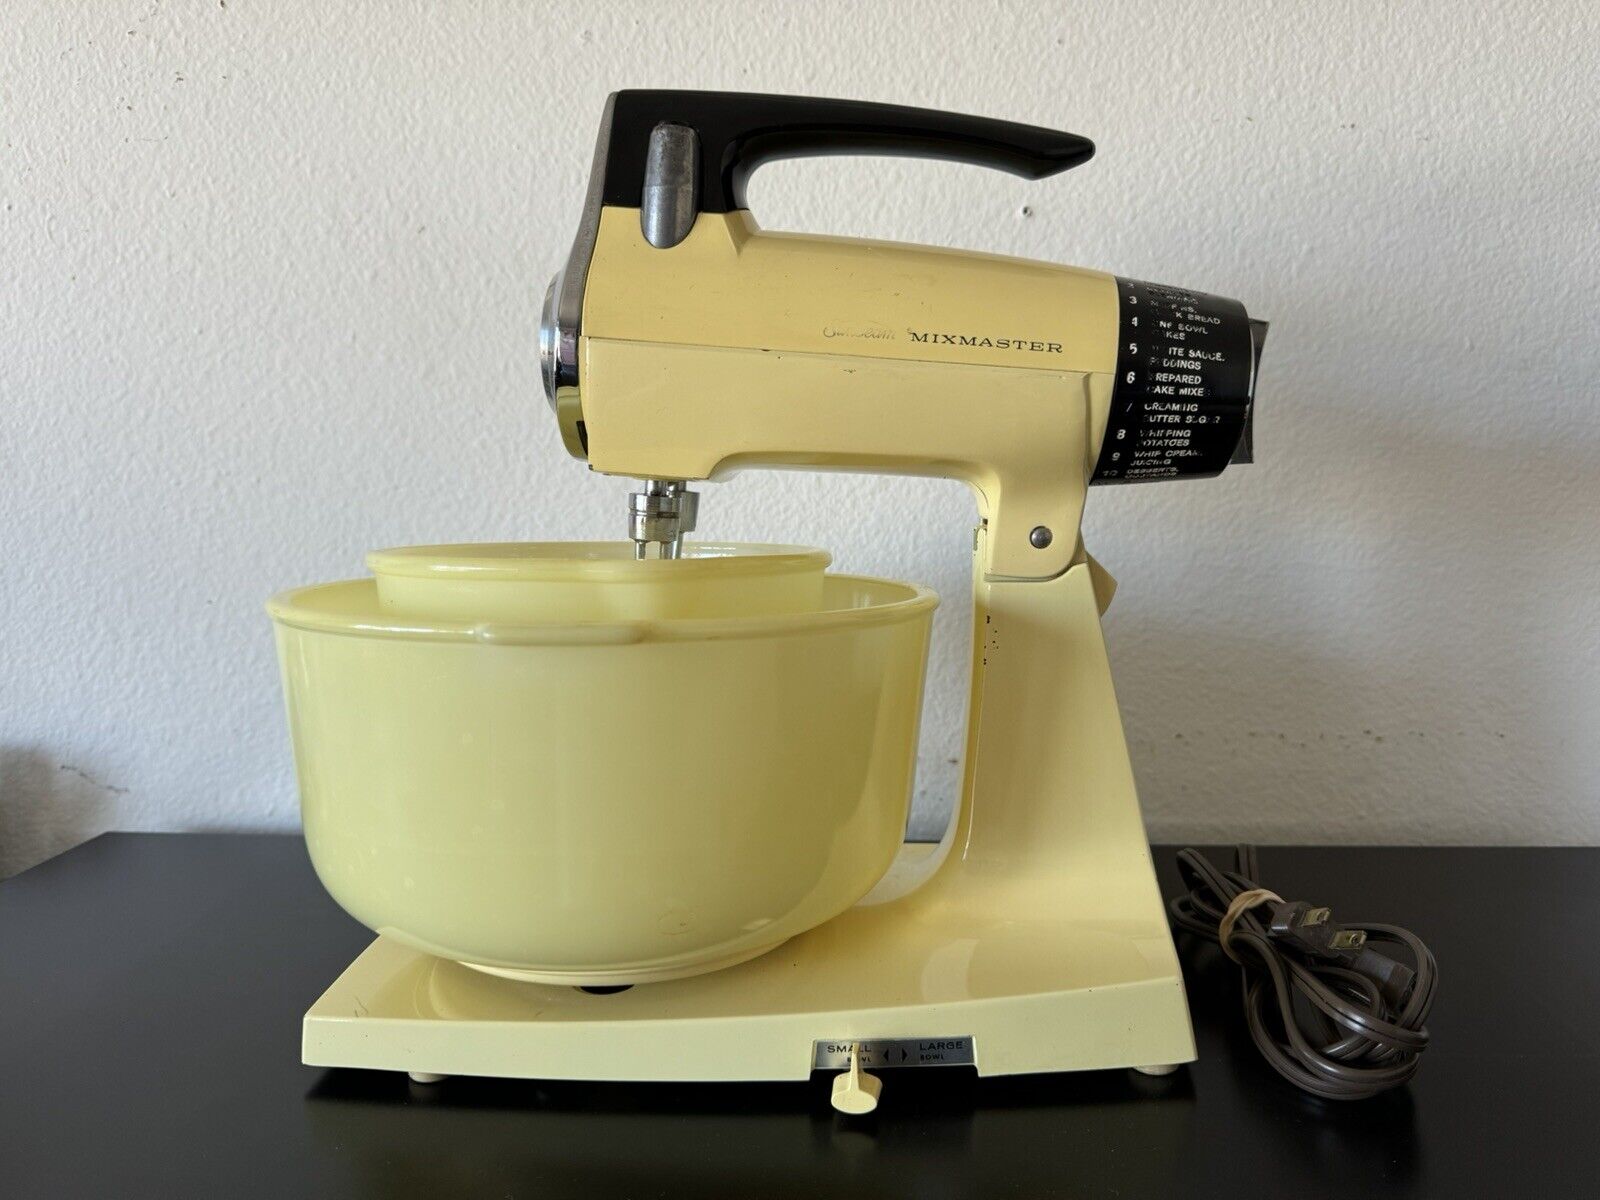 Vintage Sunbeam Mixmaster 12 Speed Stand Mixer Harvest Gold w/ Beaters 2 Bowl